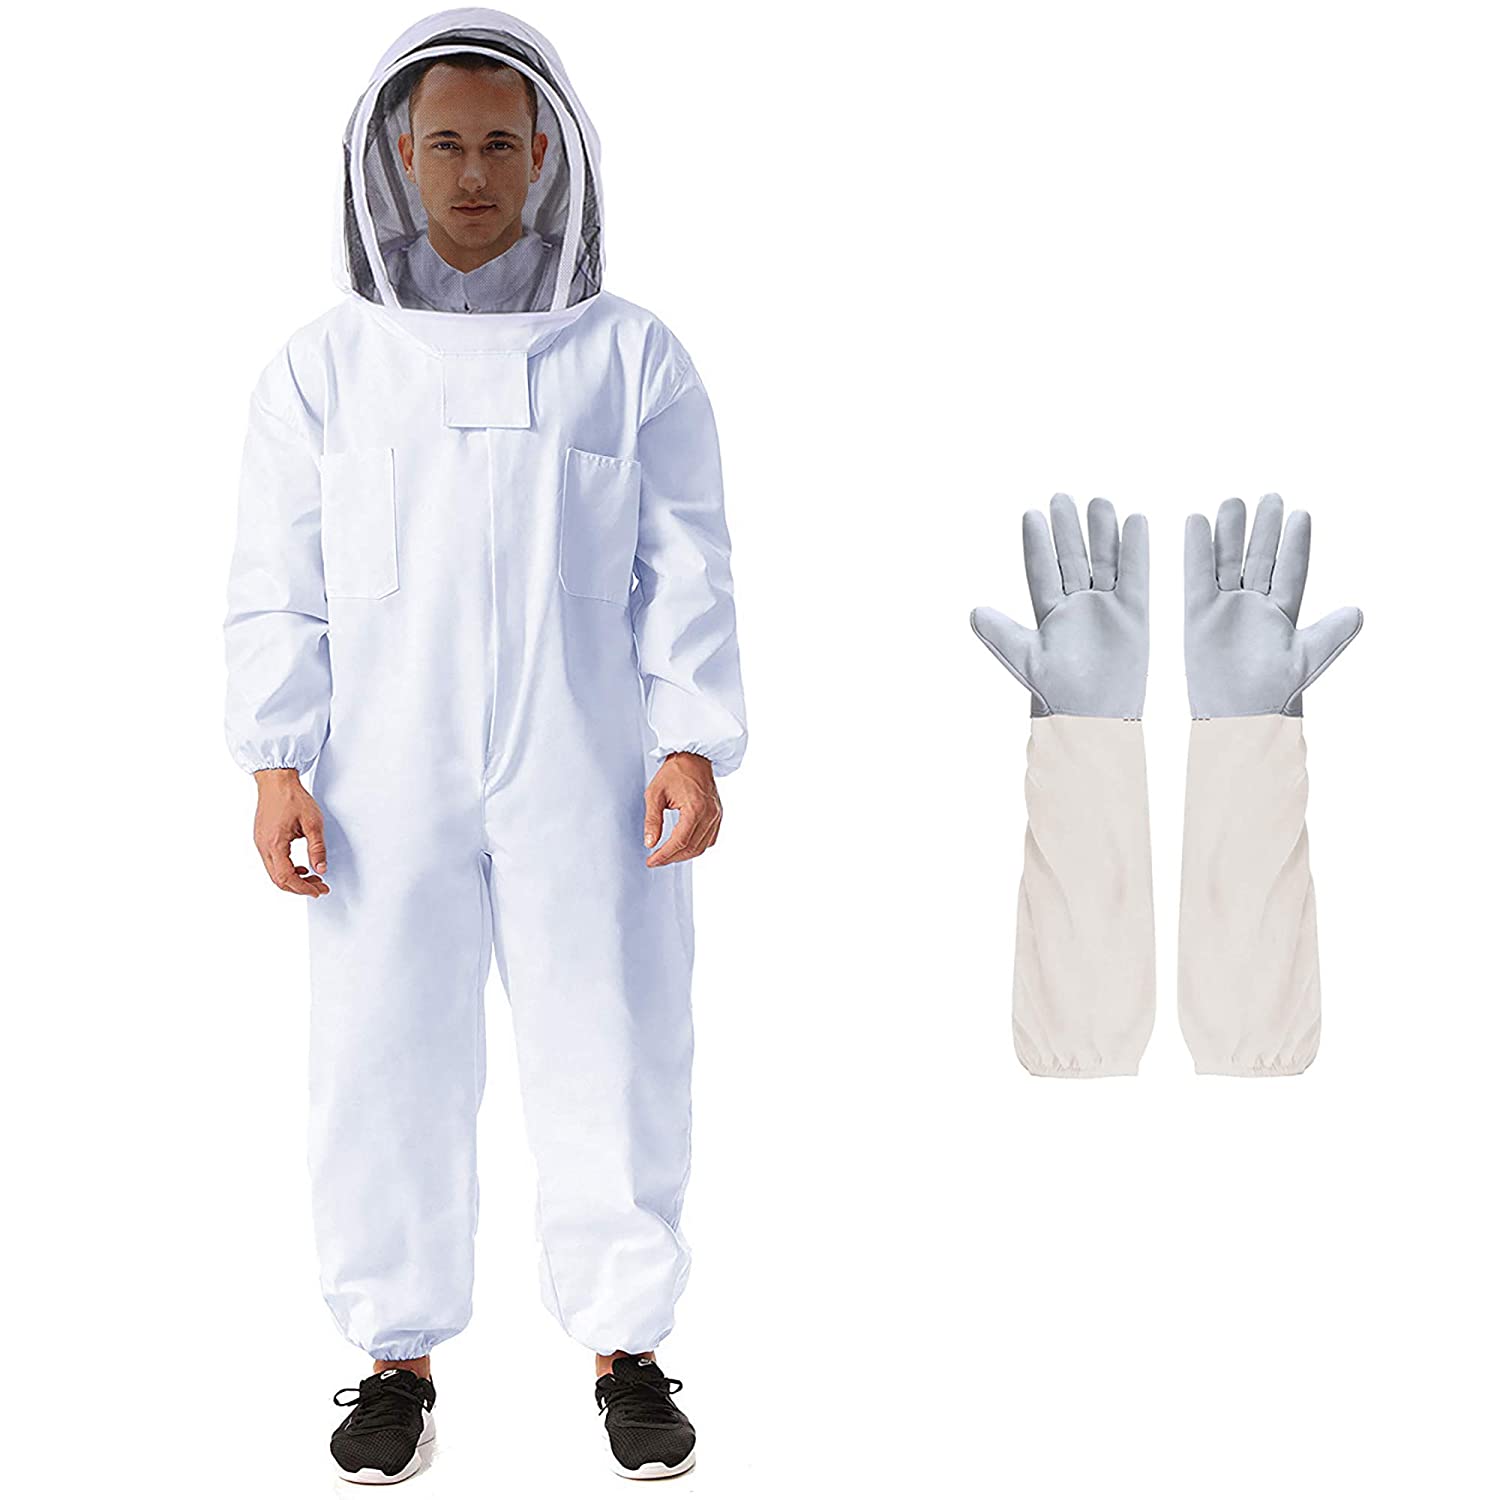 Best Ventilated Bee Suits - Reliancer Beekeeping Jacket with Sheepskin Gloves & Ventilated Fencing Veil